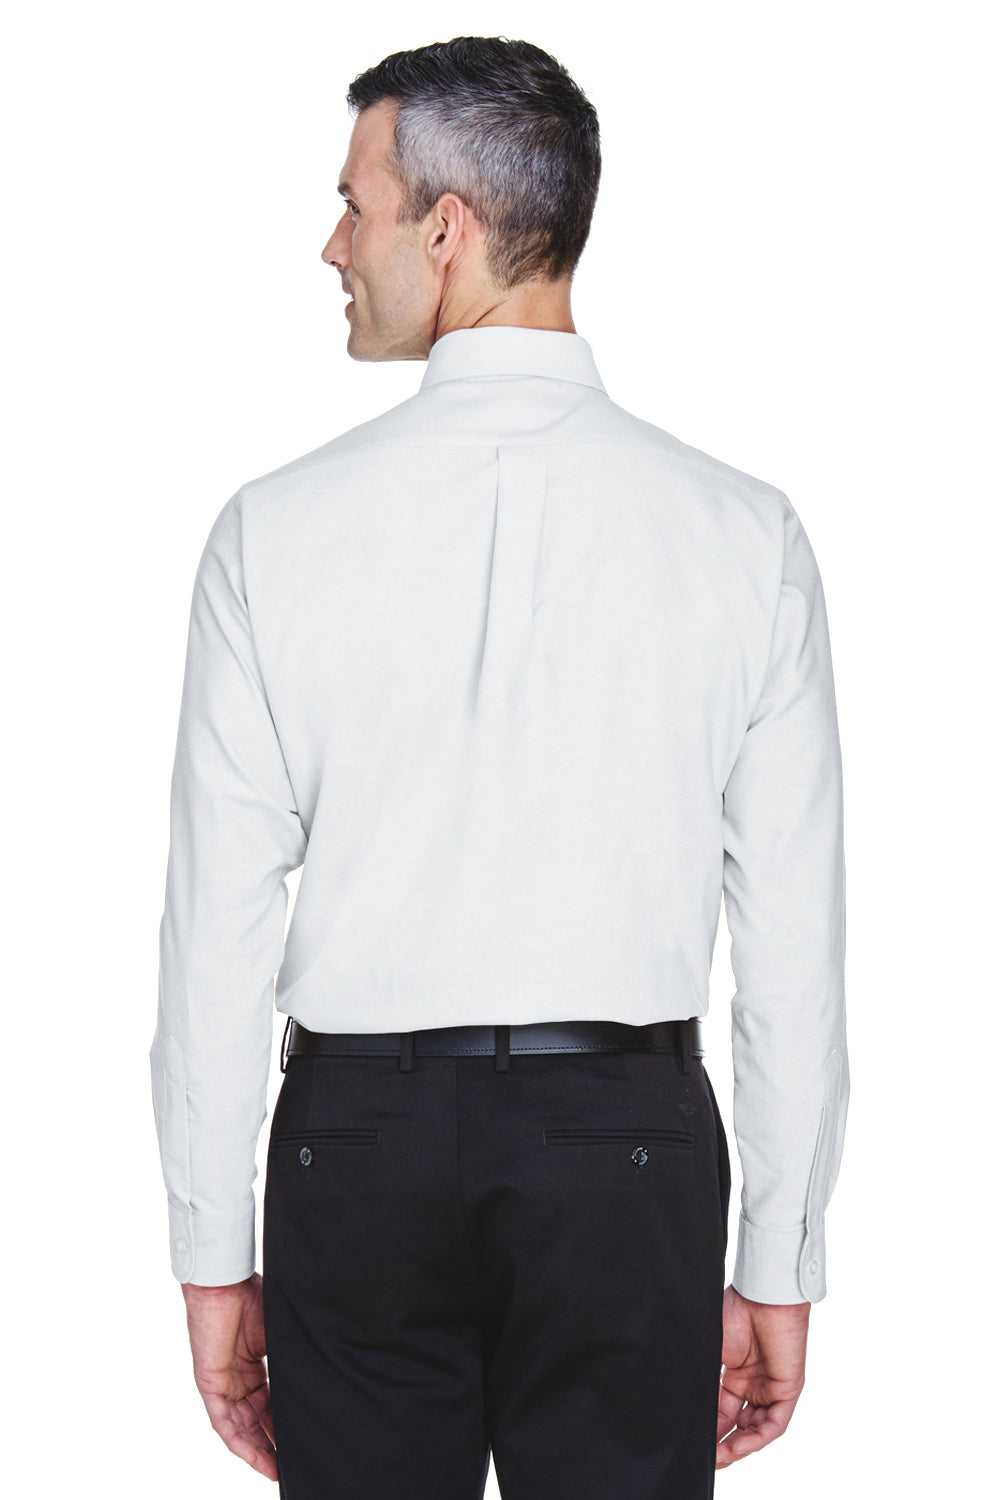 UltraClub 8970 Mens Classic Oxford Wrinkle Resistant Long Sleeve Button Down Shirt w/ Pocket White Back